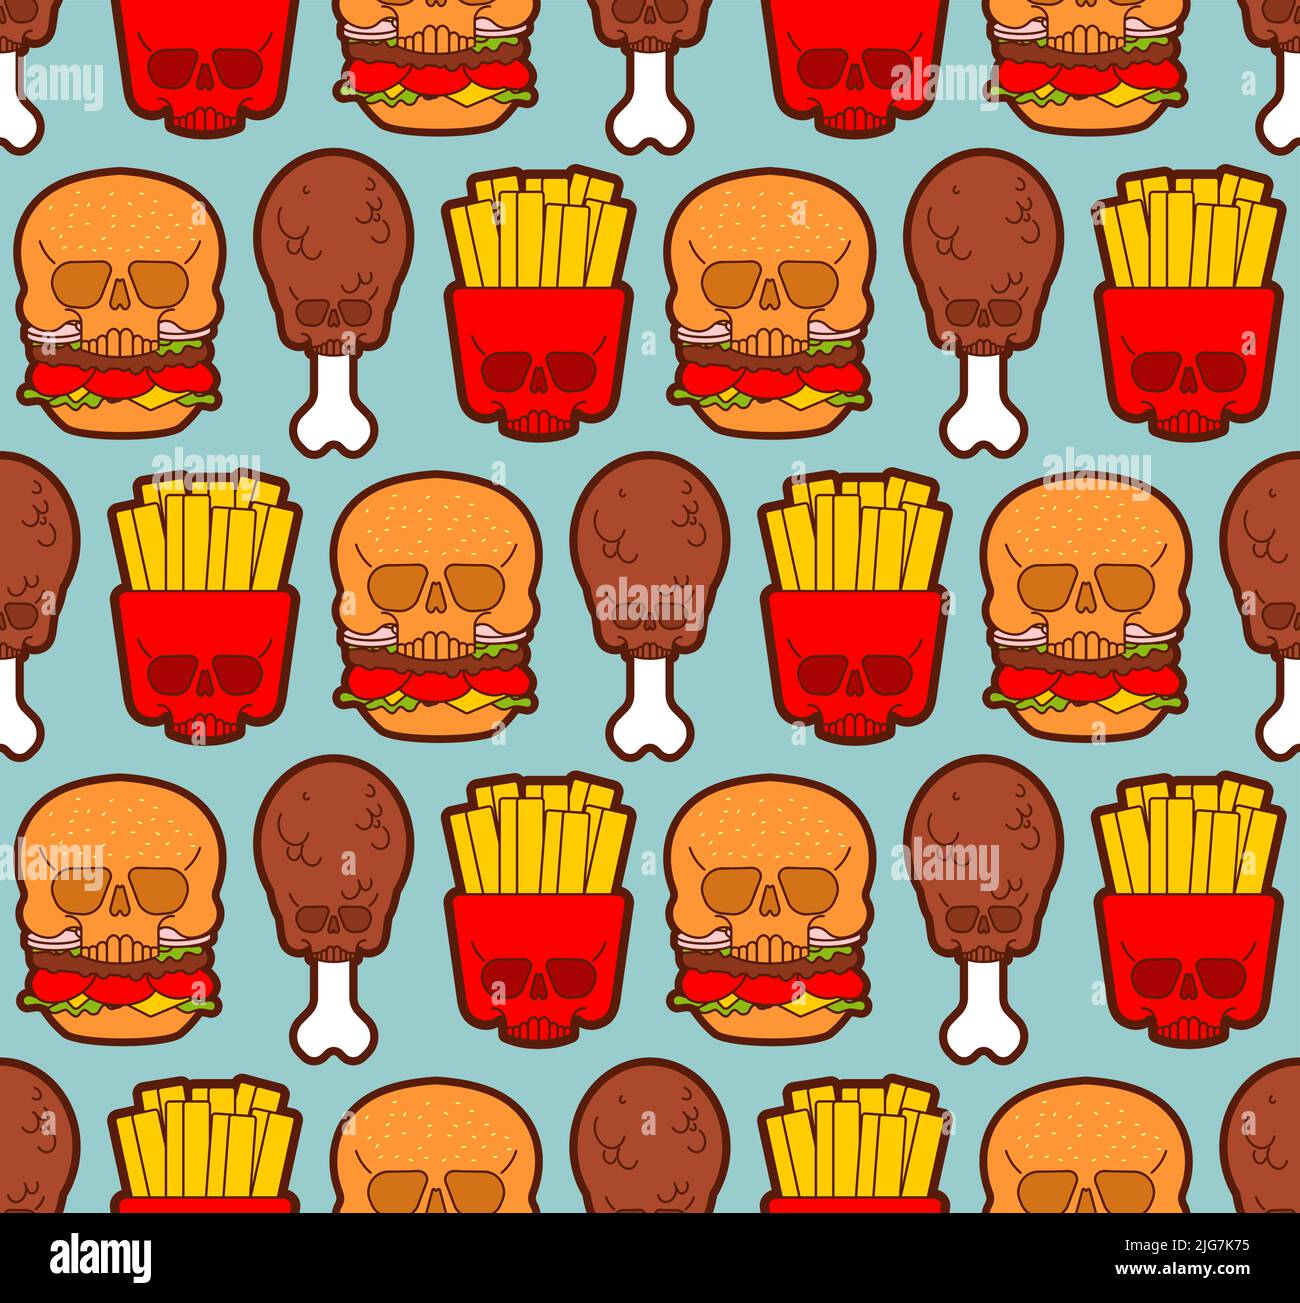 Skull fast food pattern seamless. burger and fried chicken leg and French fries background. Harmful food texture. not healthy fastfood ornament Stock Vector